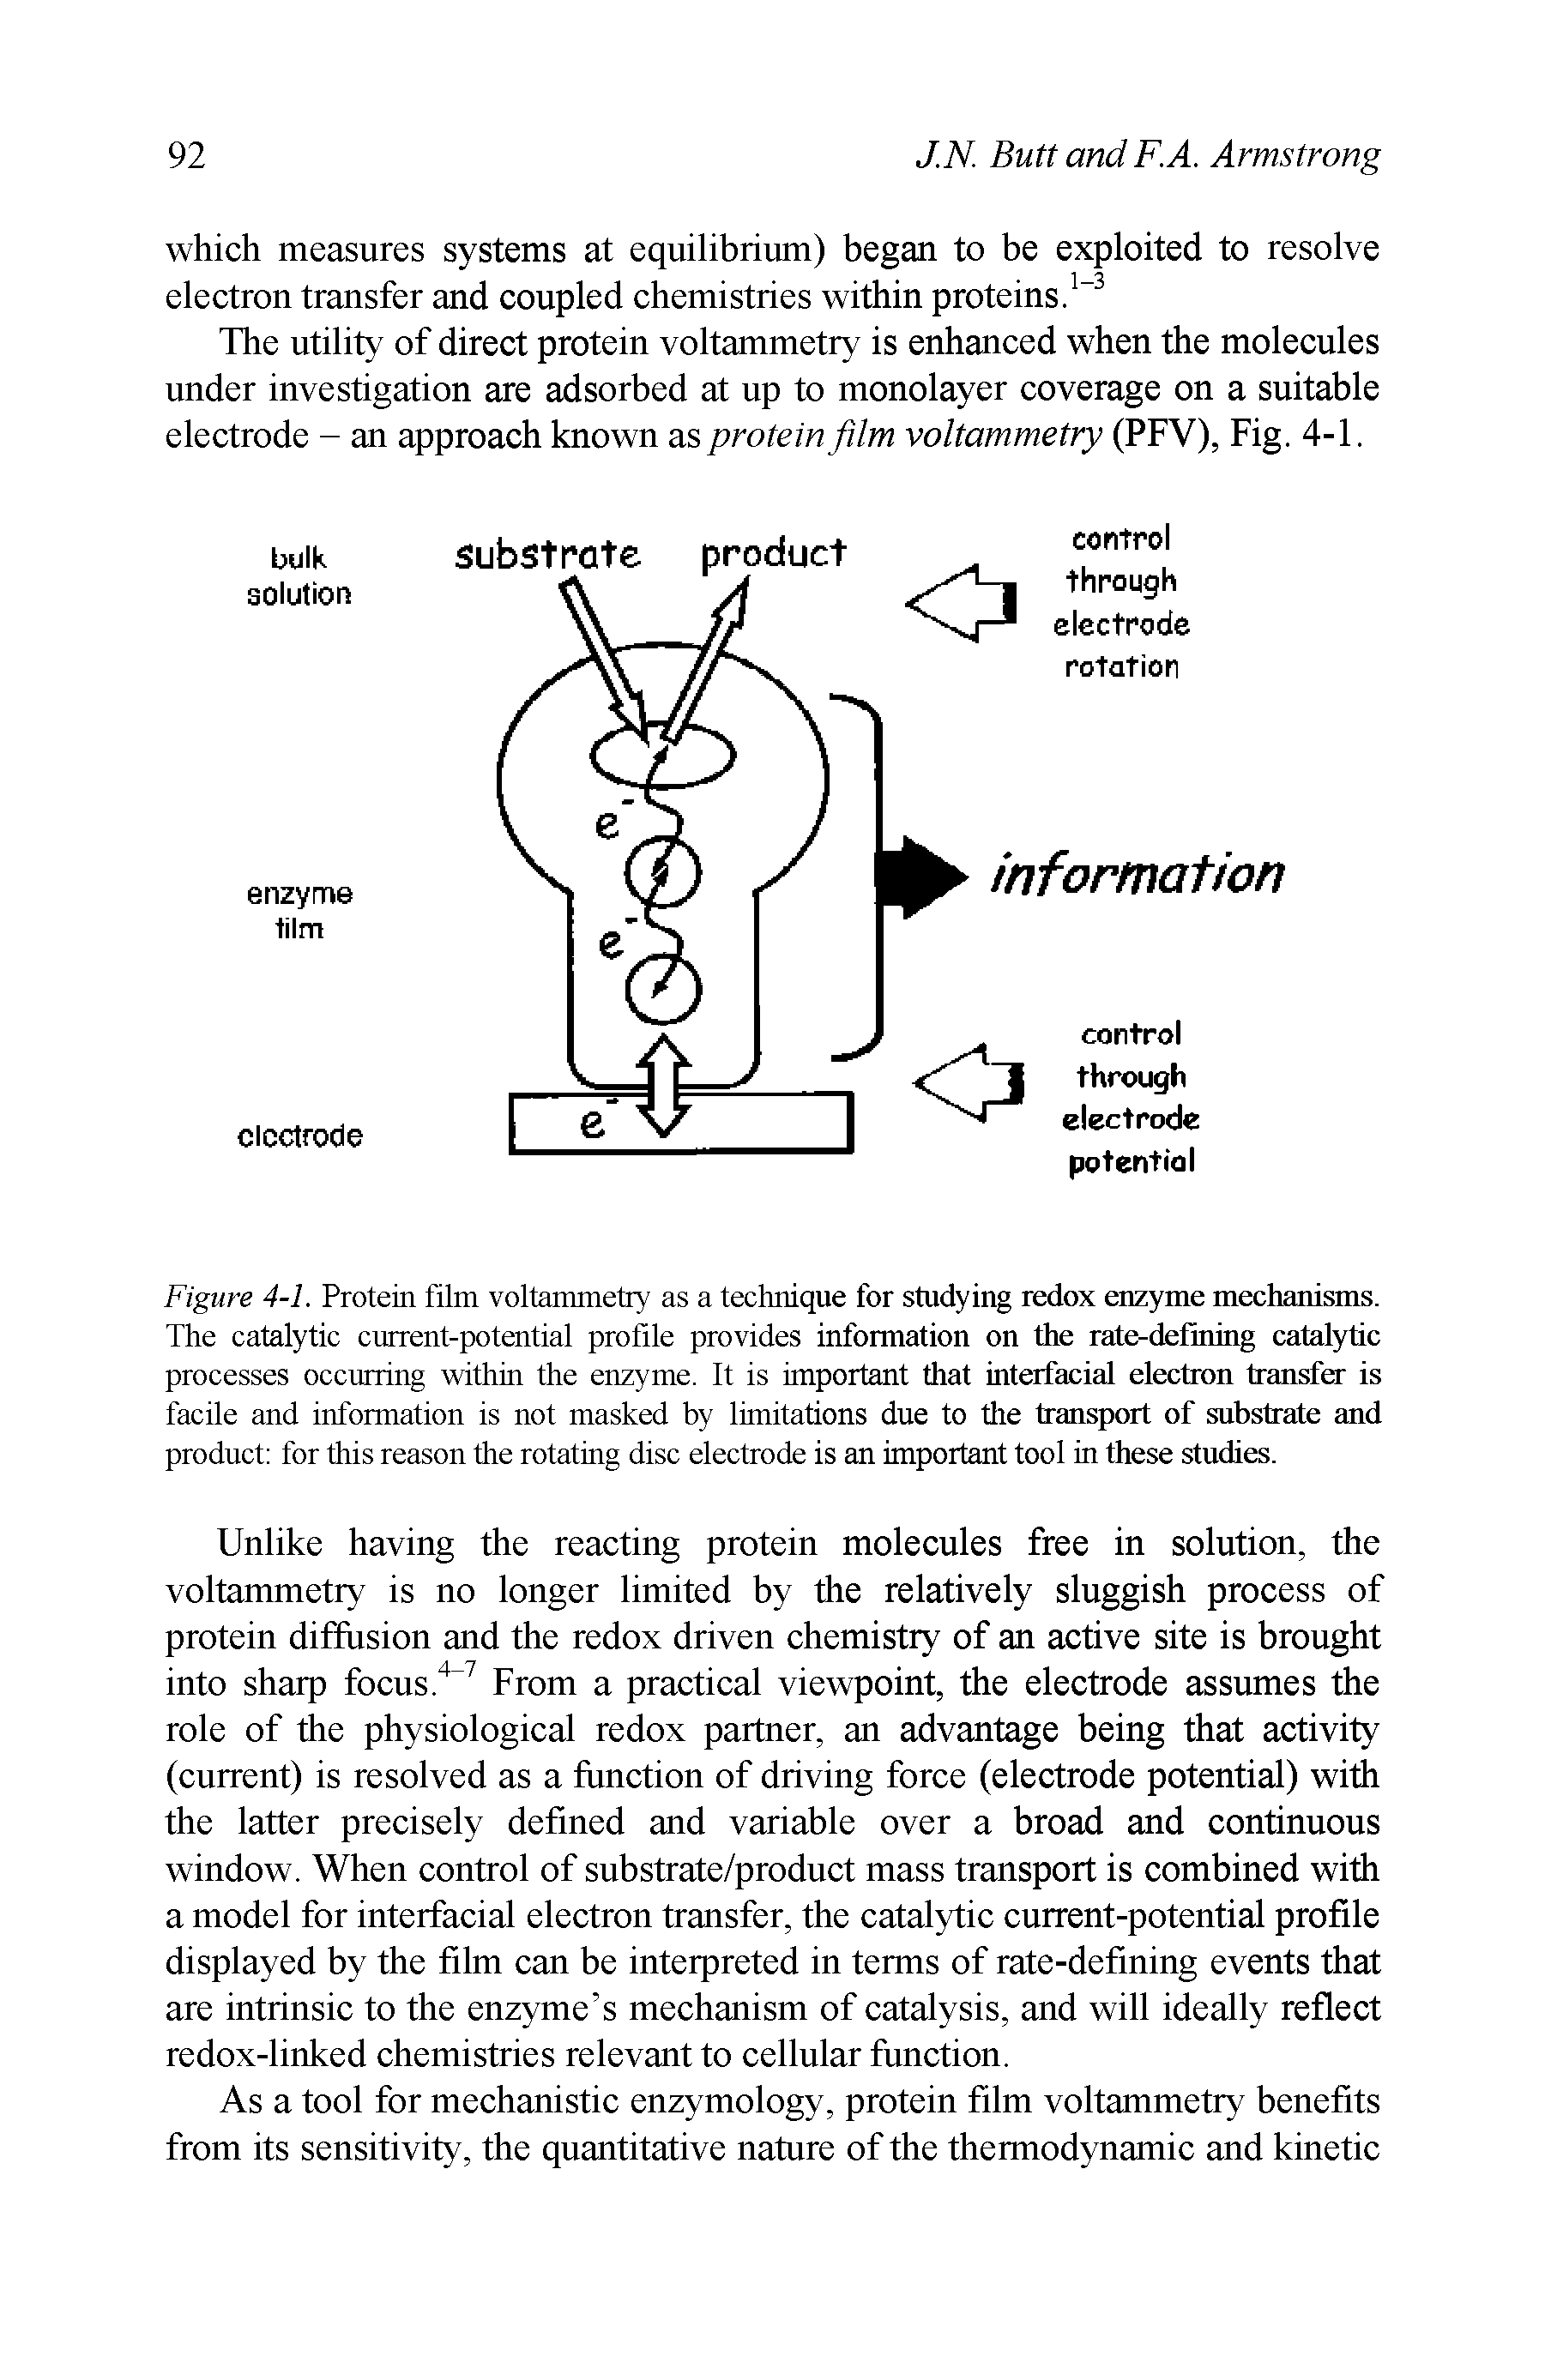 Figure 4-1. Protein film voltammetry as a technique for studying redox enzyme mechanisms. The catalytic current-potential profile provides information on the rate-defining catalytic processes occurring within the enzyme. It is important that interfacial electron transfer is facile and information is not masked by limitations due to tlie transport of substrate and product for this reason the rotating disc electrode is an important tool in these studies.